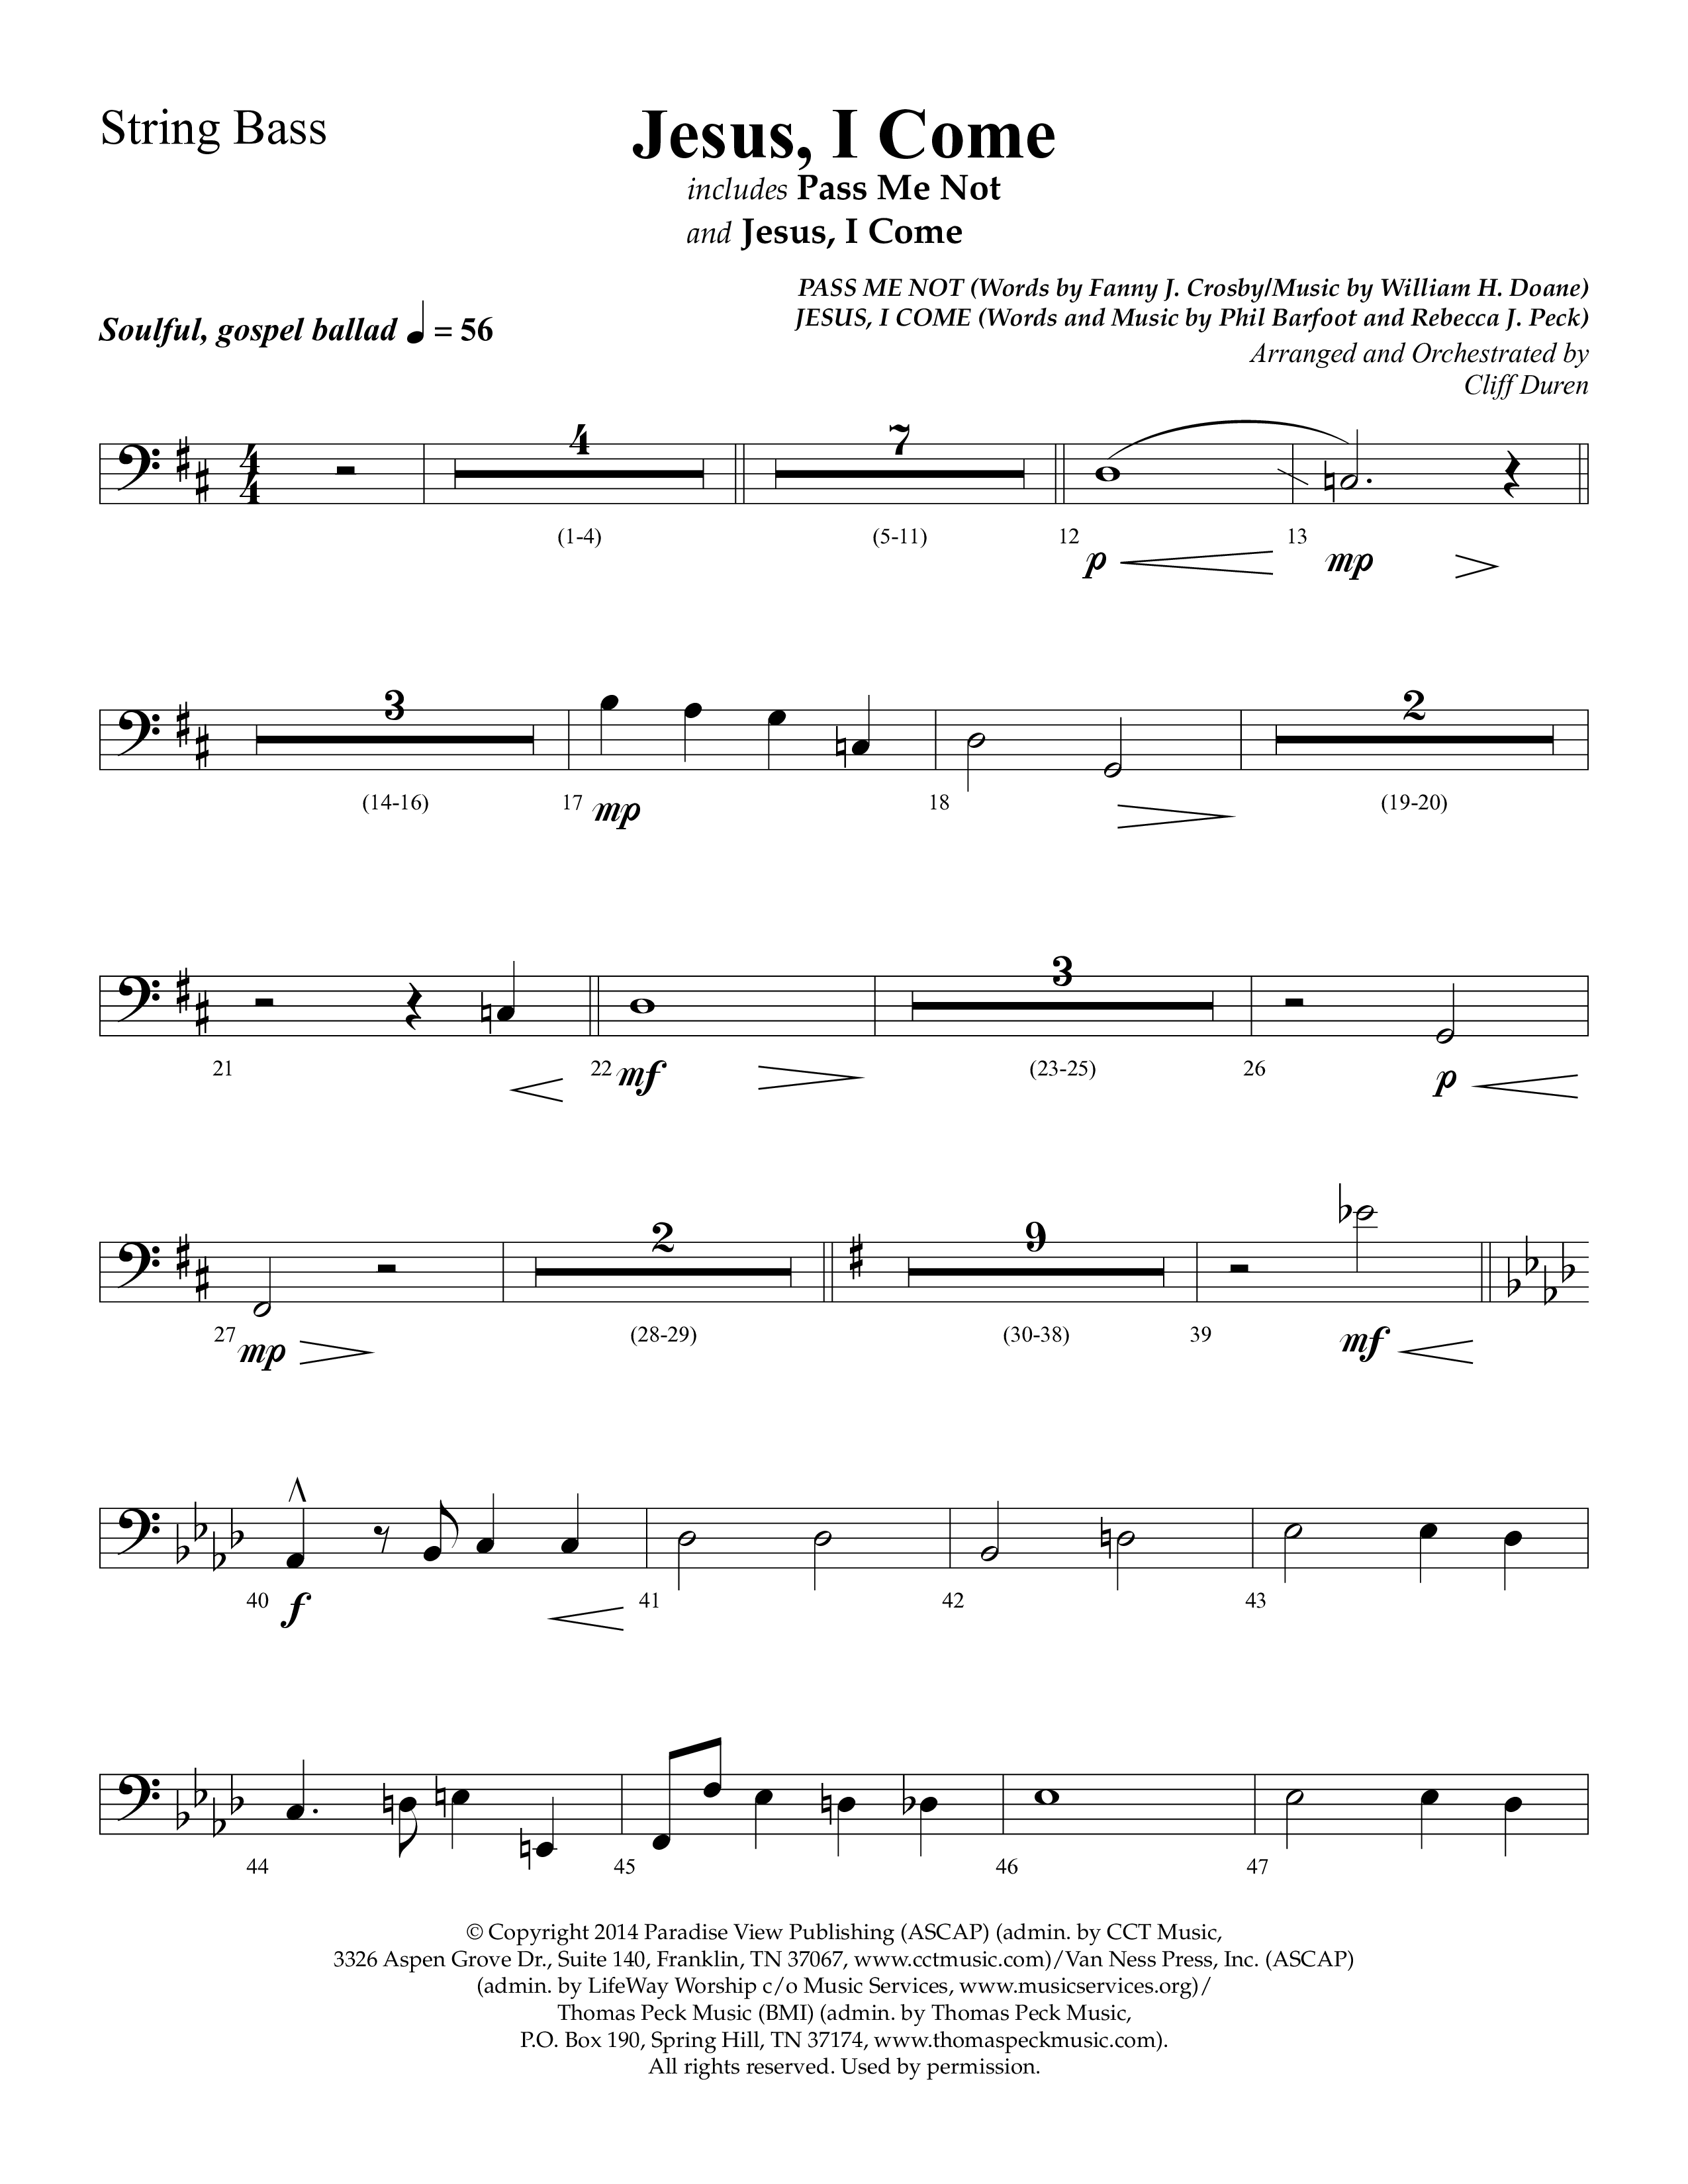 Jesus I Come (with Pass Me Not) (Choral Anthem SATB) String Bass (Lifeway Choral / Arr. Cliff Duren)